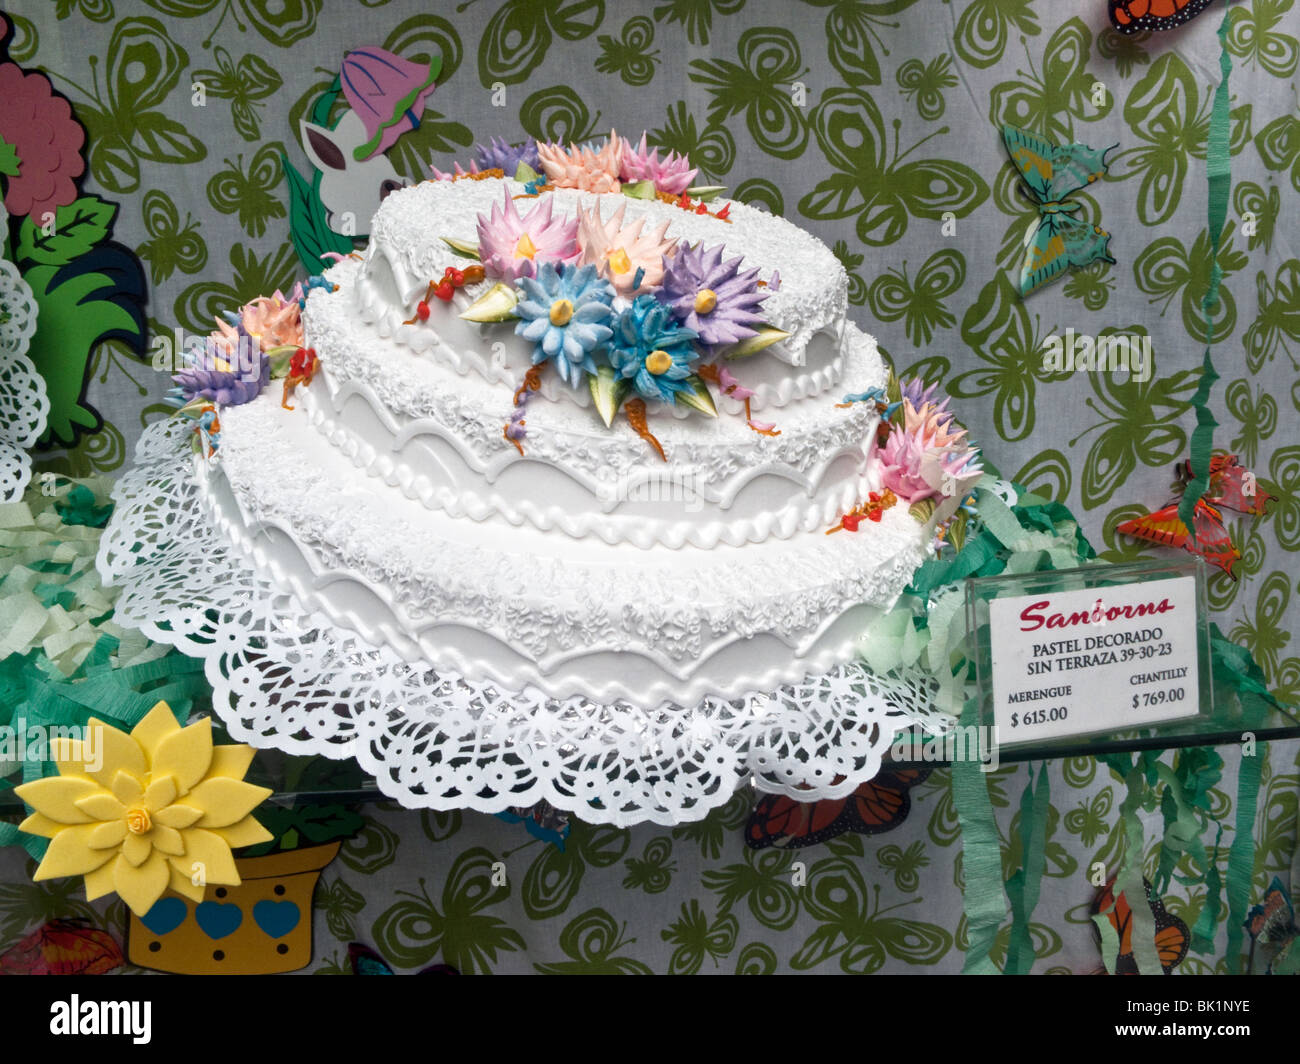 elaborate tiered cake with white icing decorated with large realistic colored sugar flowers in Sanborn's window Mexico City Stock Photo